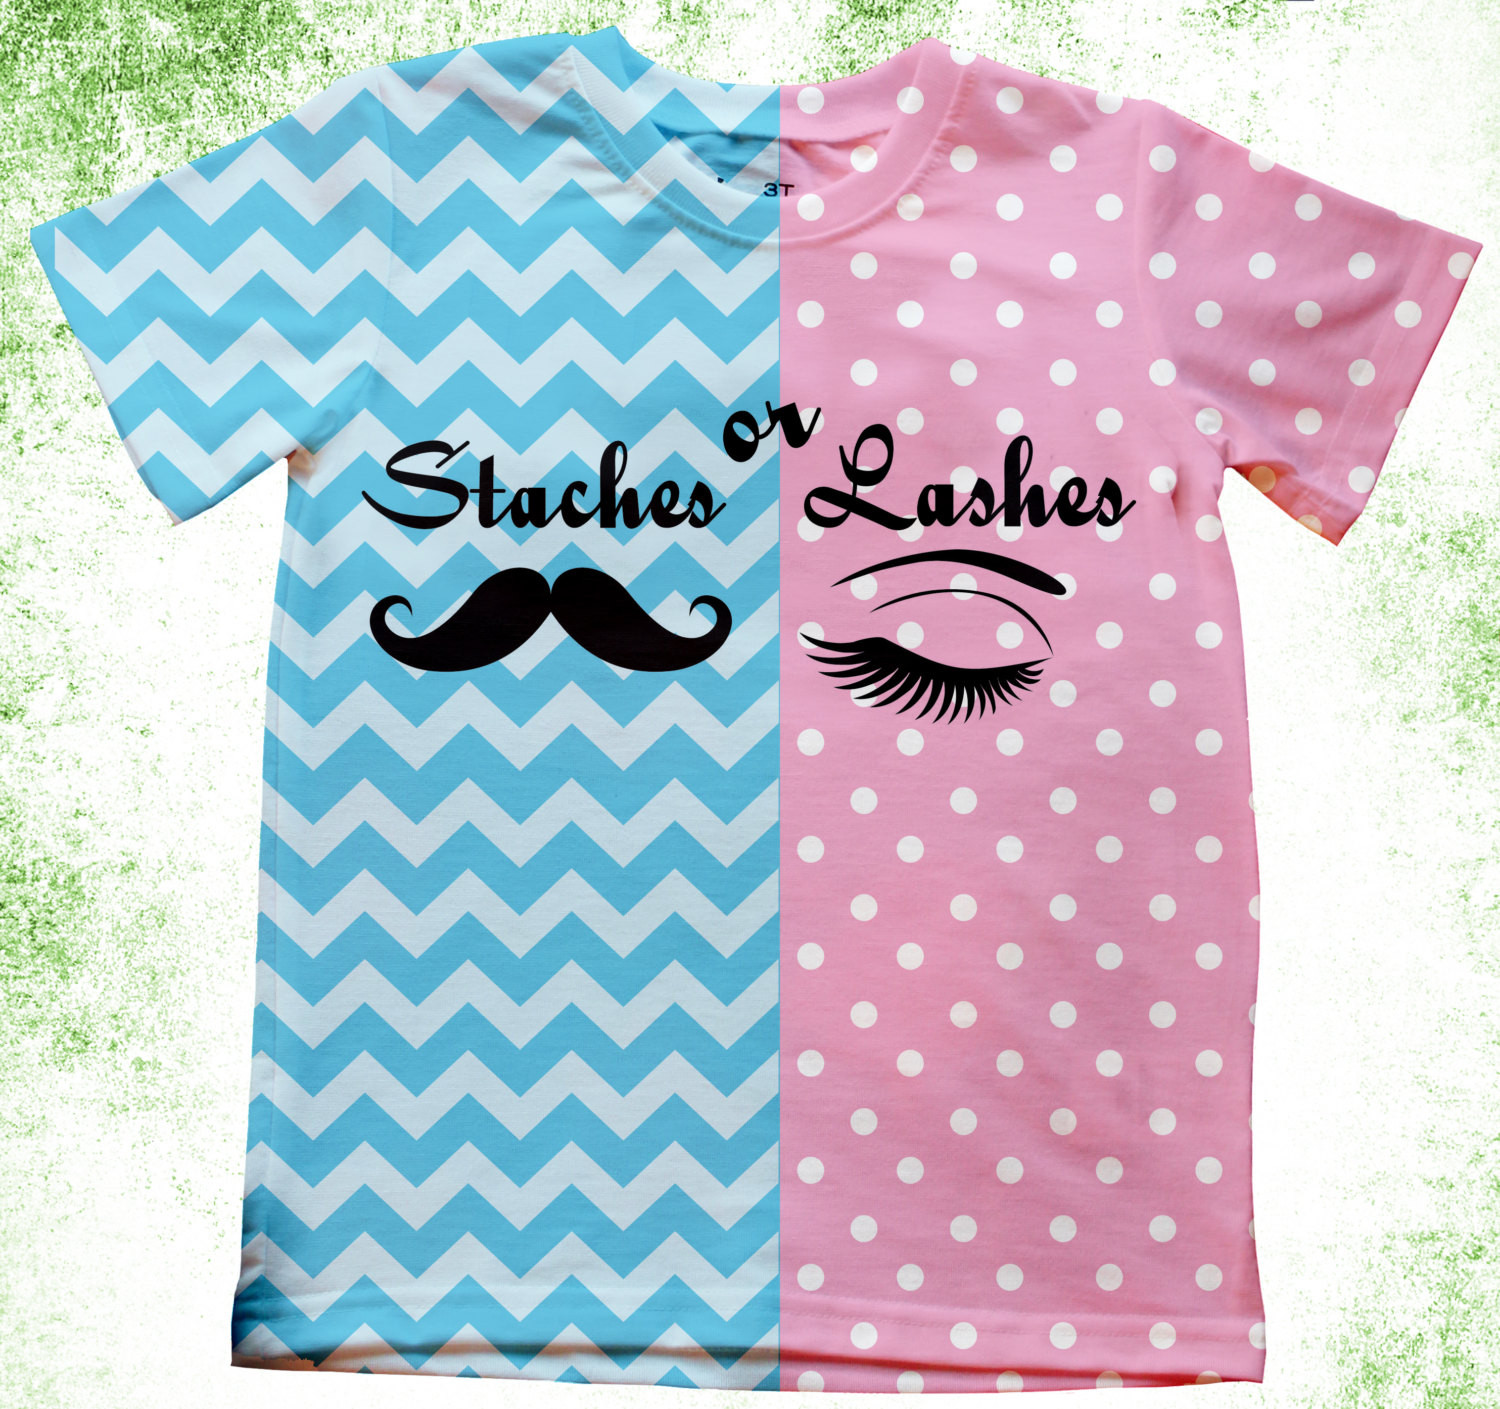 Gender Reveal Party Shirt Ideas
 Personalized Adult Gender Reveal Shirts lashes or